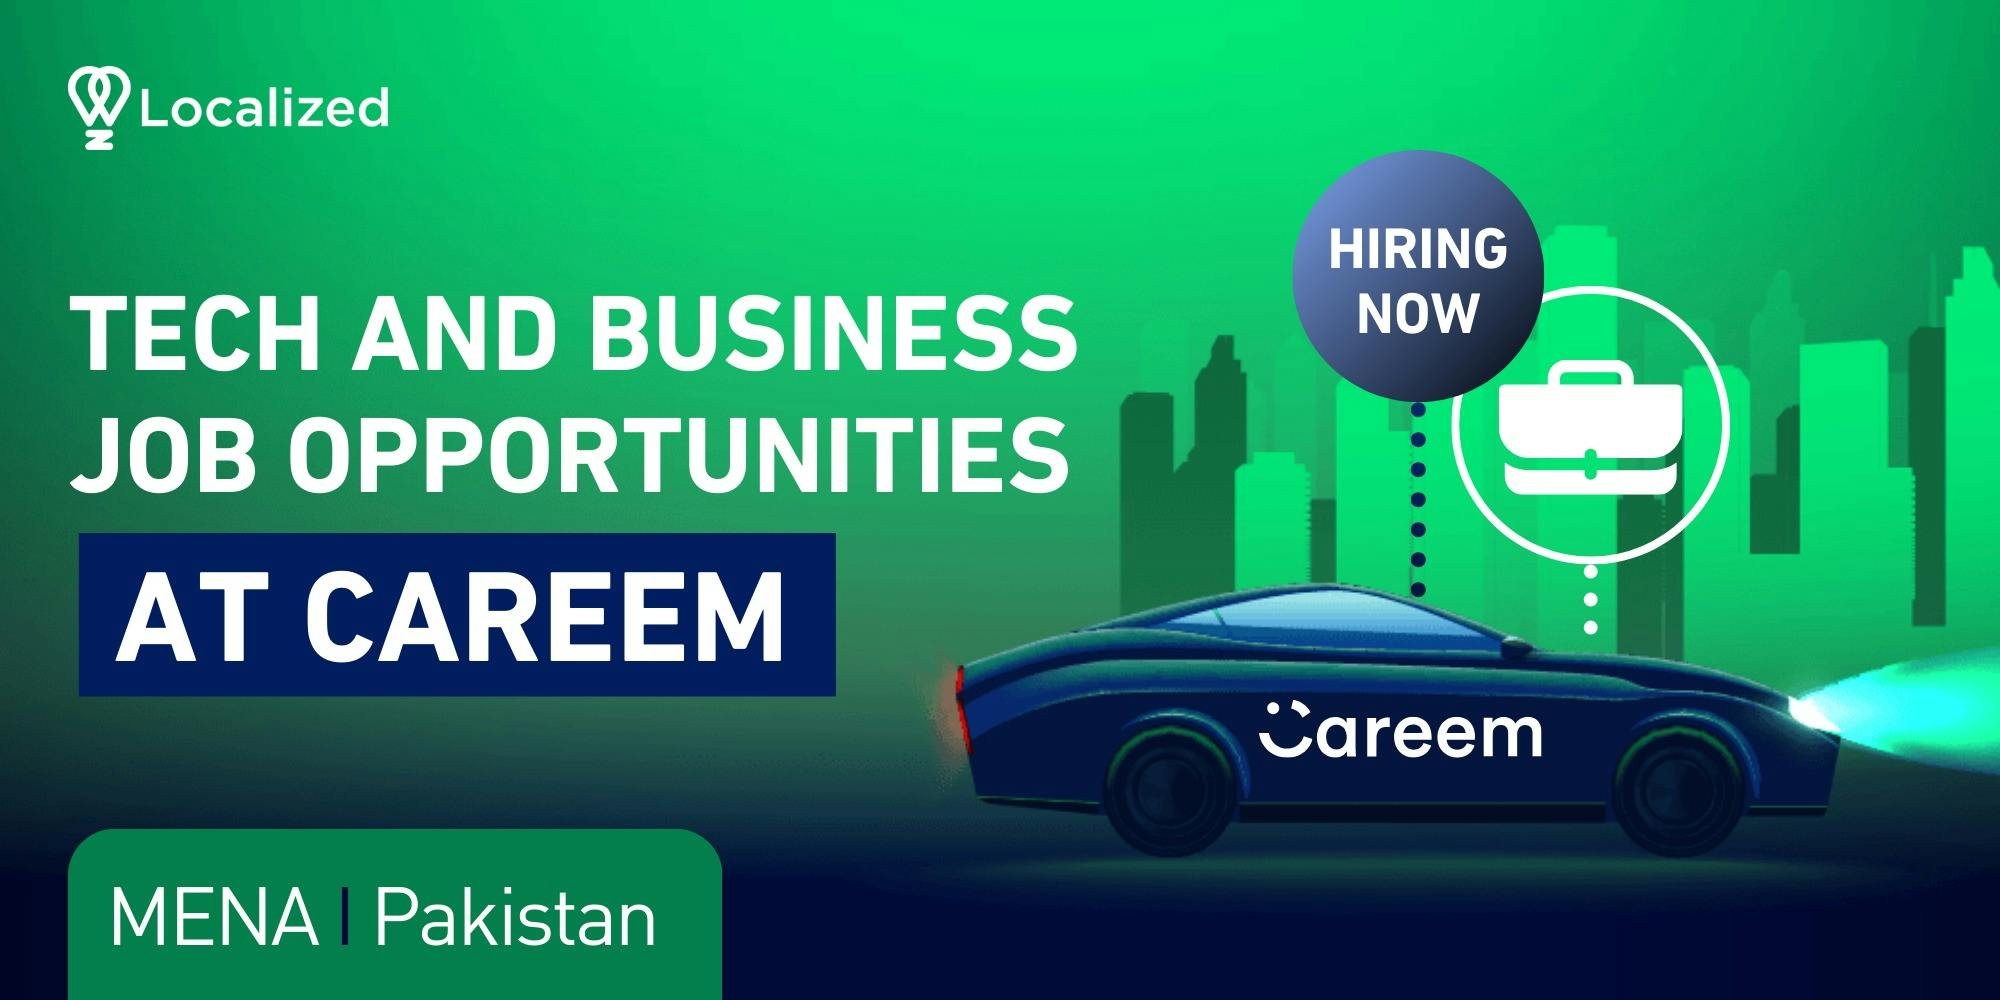 Working at Careem - MENA's First Unicorn: Tech and Business Job Opportunities